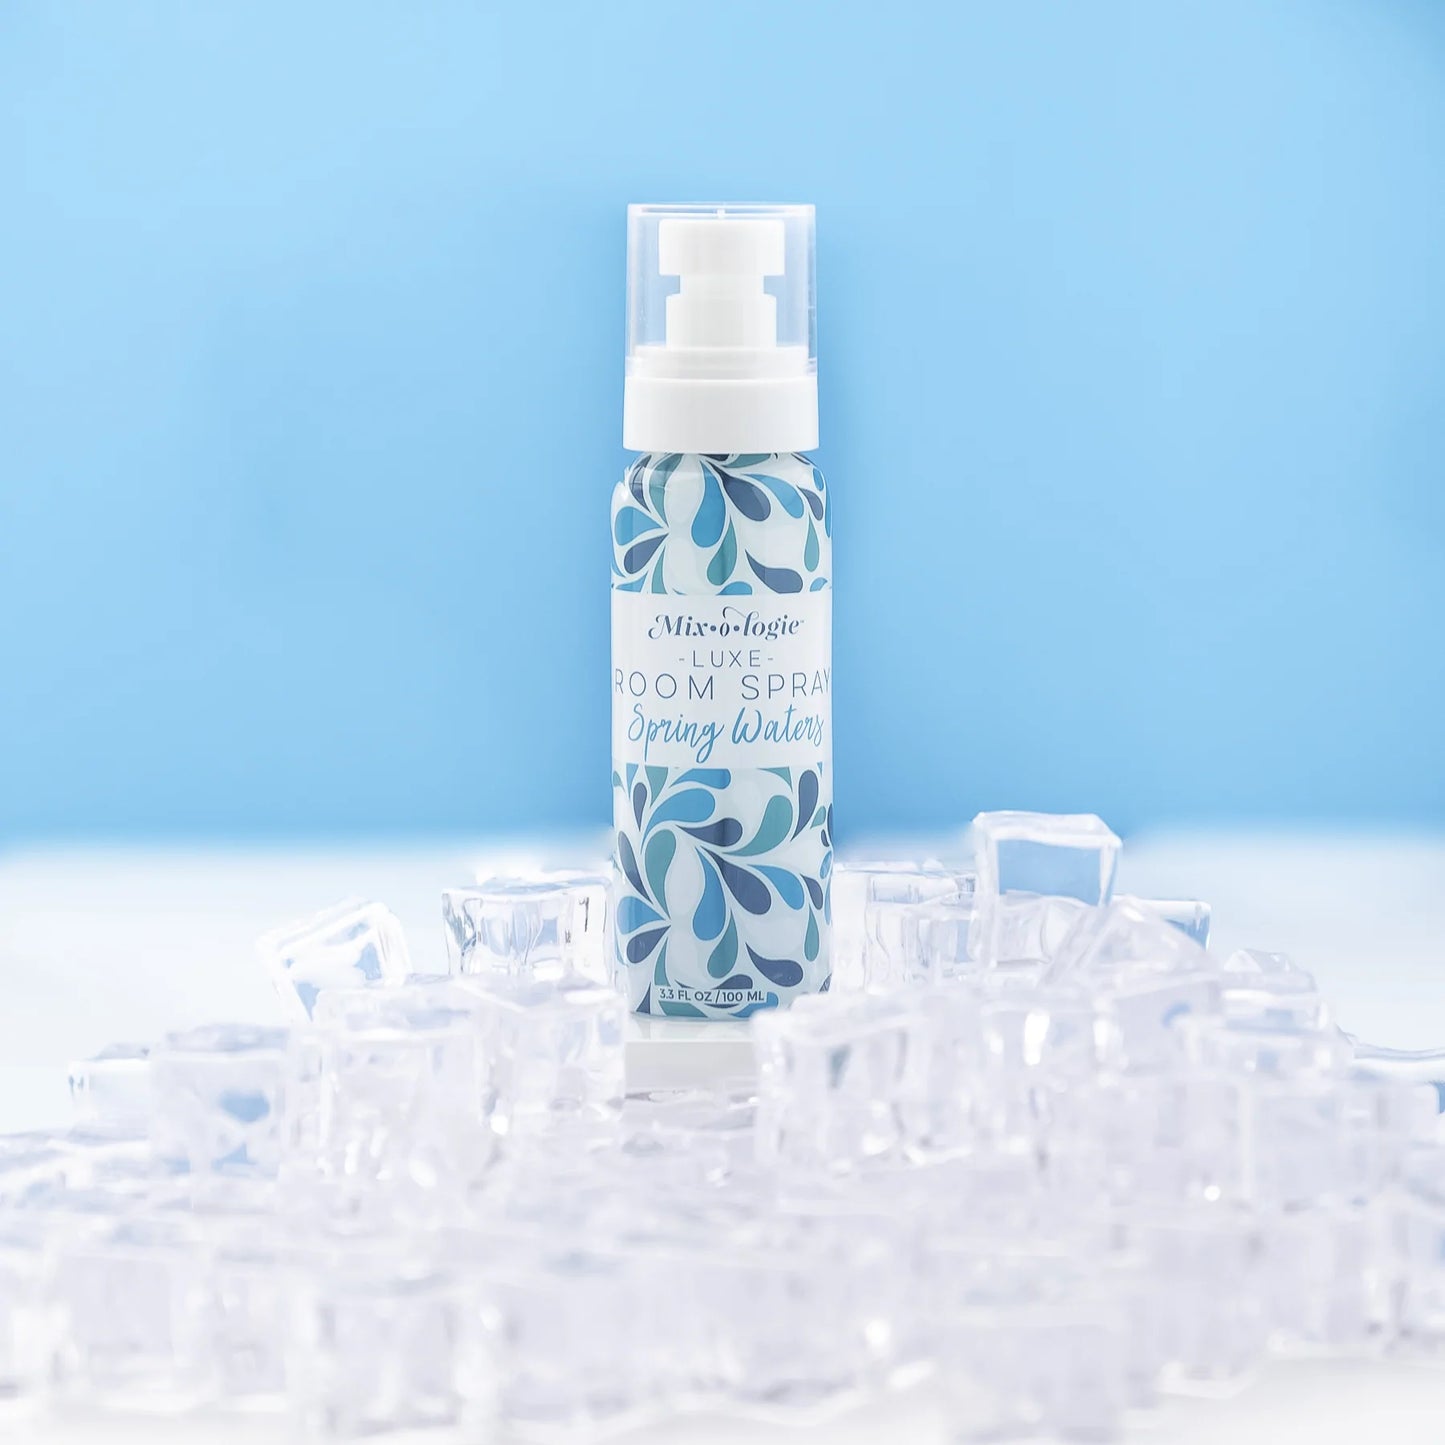 Mix-o-logie Luxe Room Spray:  Spring Waters